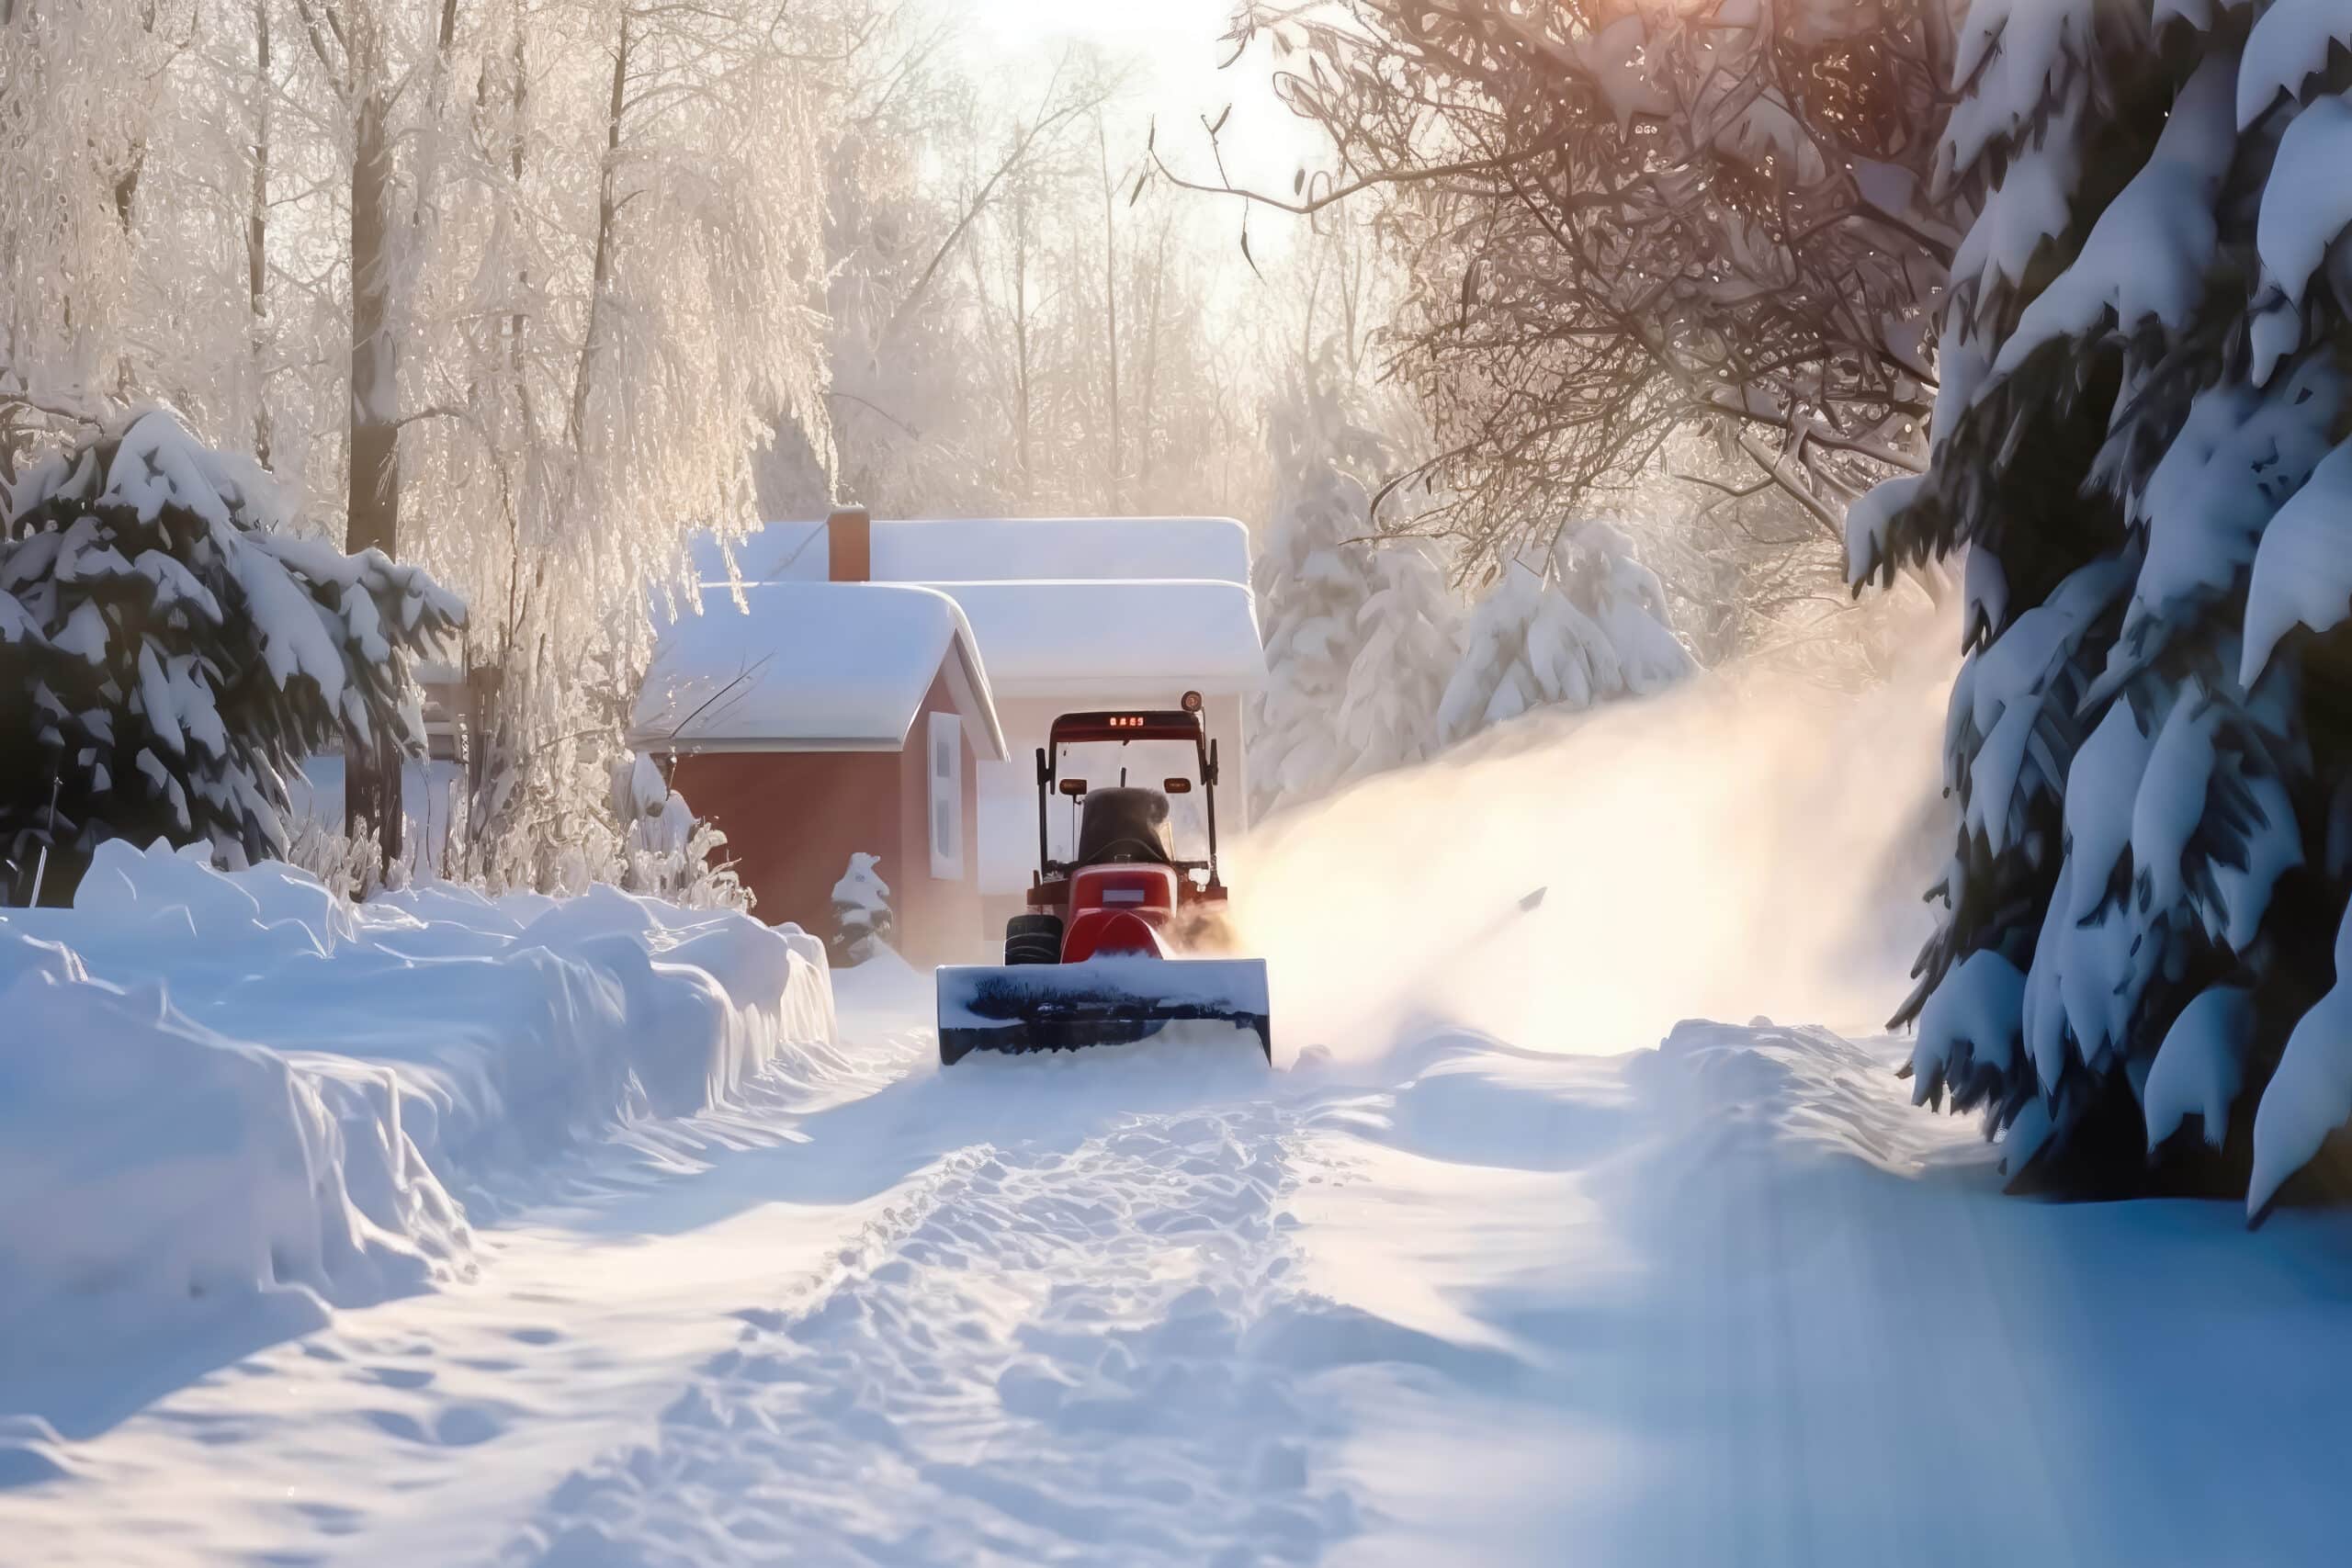 www.appr.com : Are Simplicity snow blowers considered reliable?